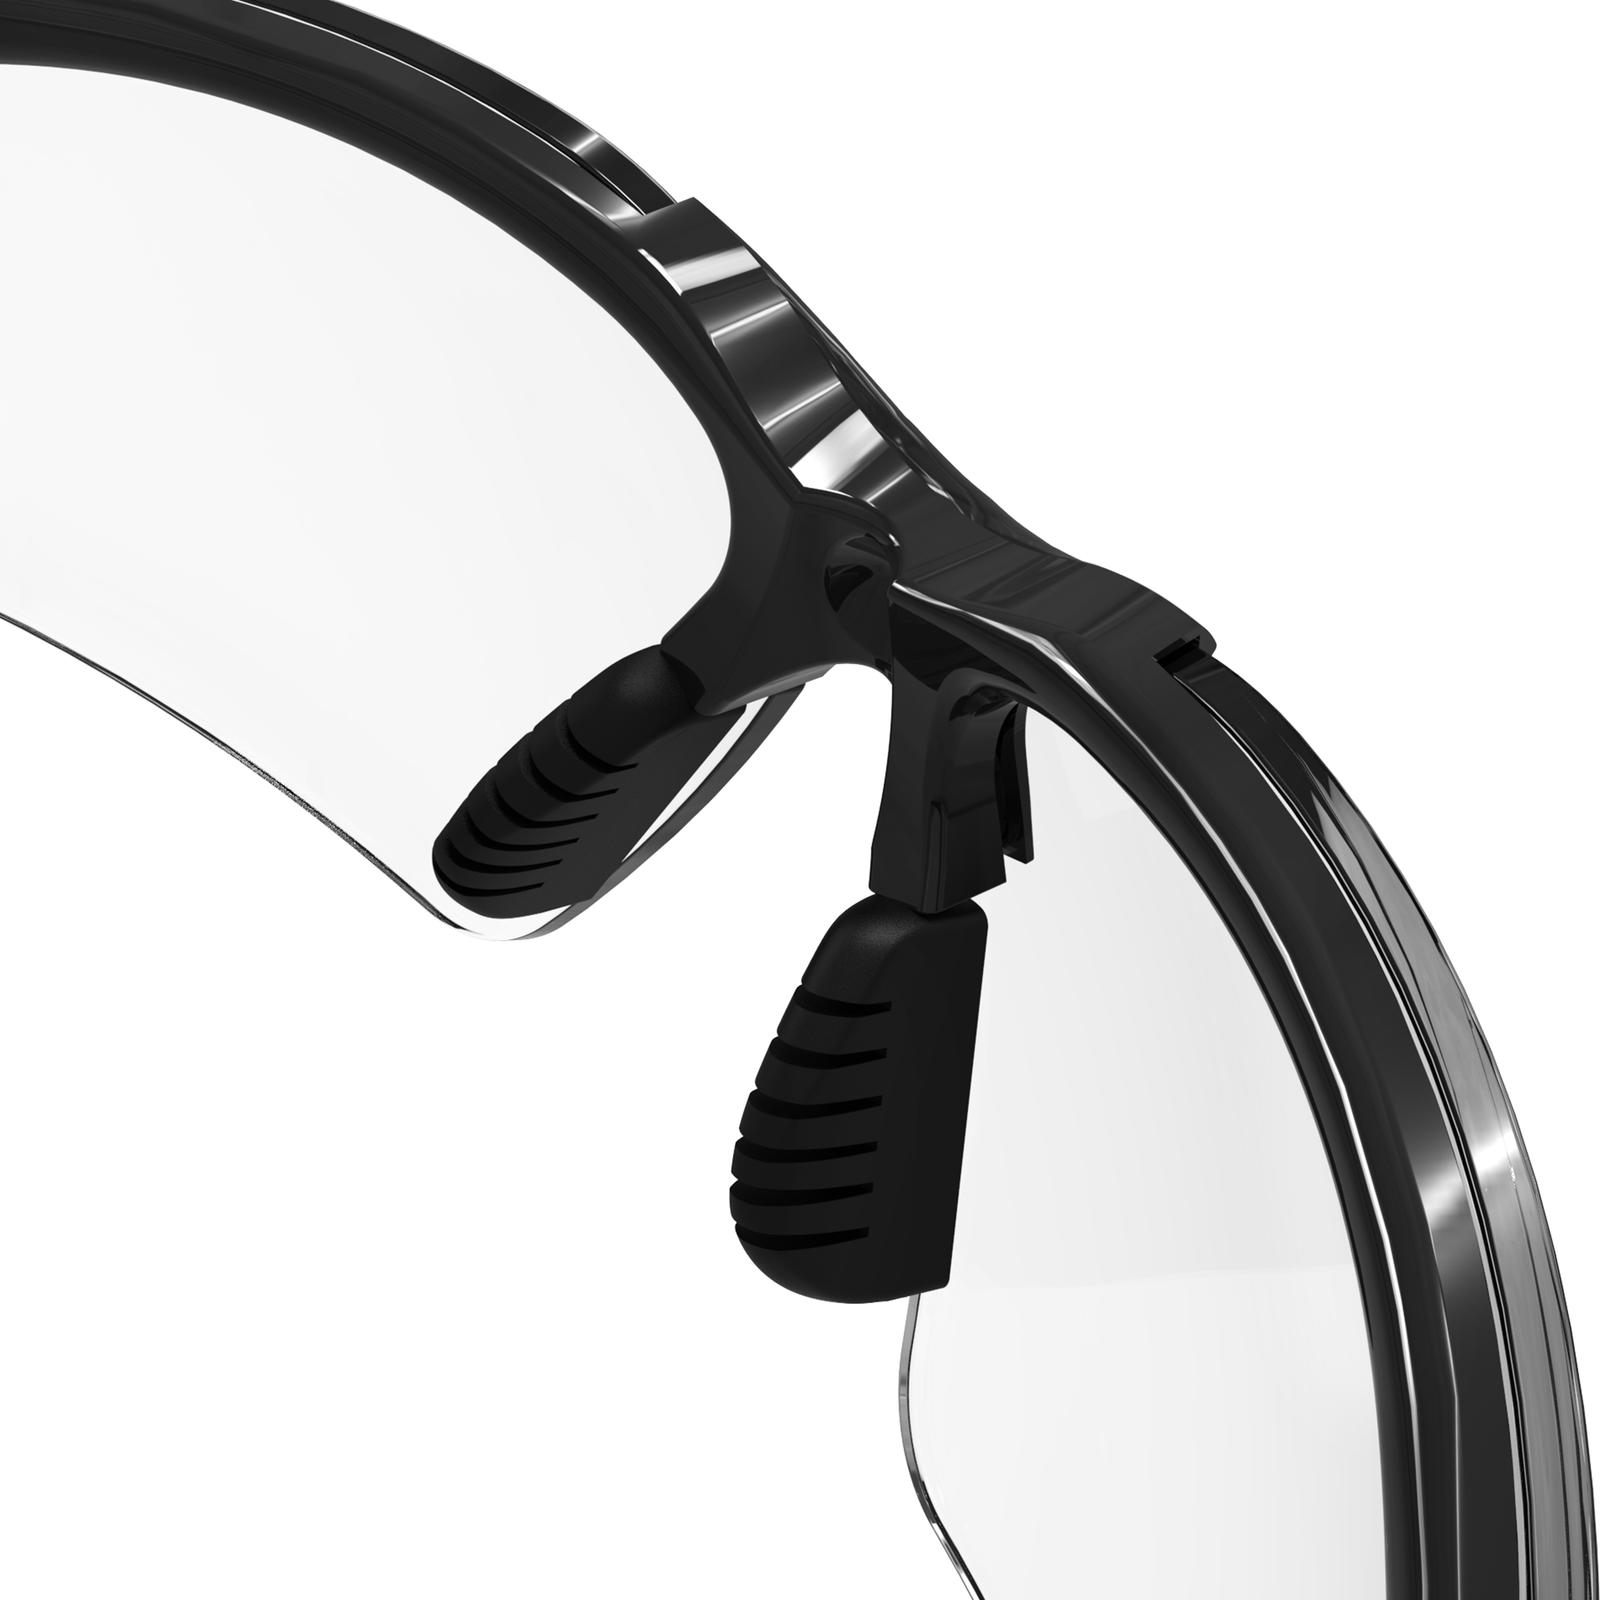 Image of the soft adjustable nose bridge of the JORESTECH polycarbonate safety glasses with flexible rubber temple clear lenses and black frame 